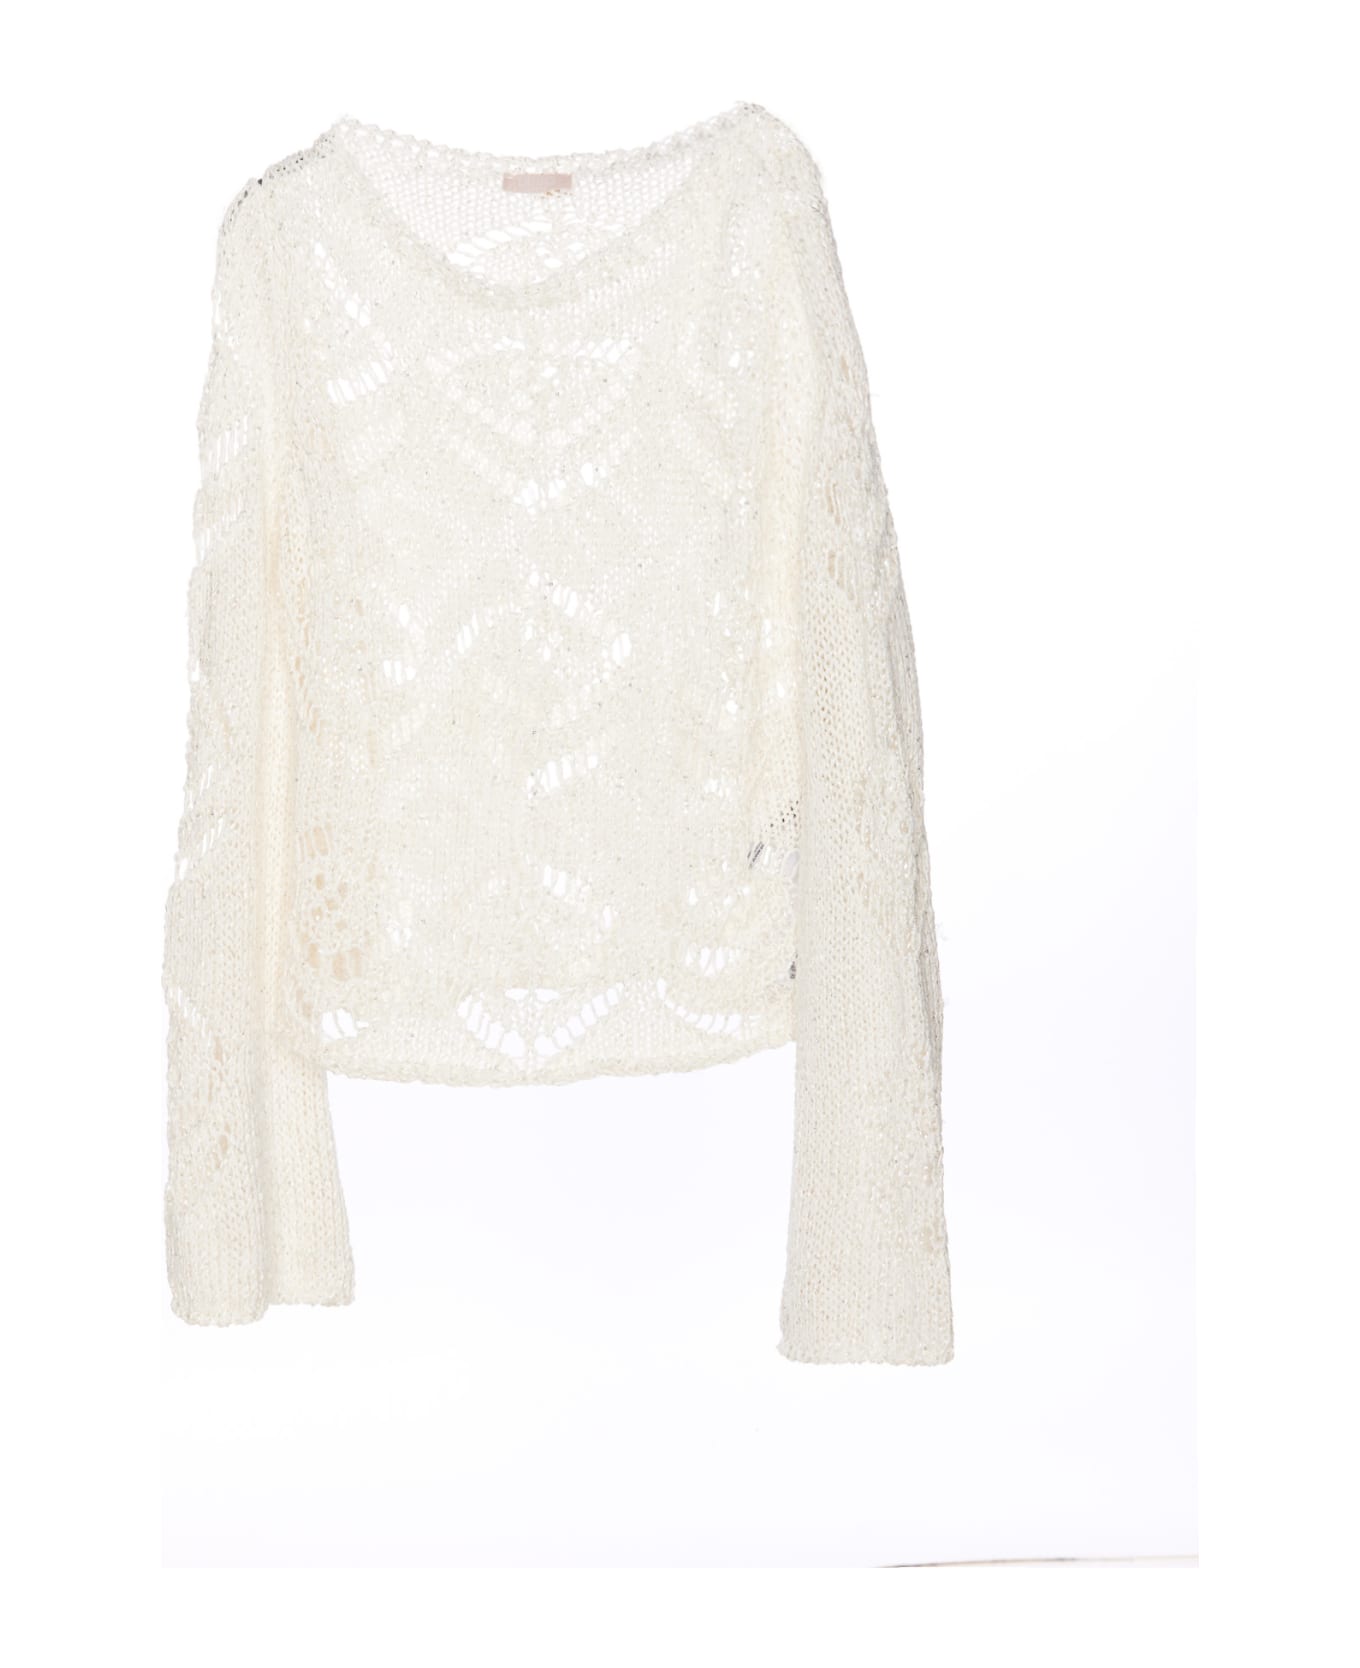 Liu-Jo Knitted Sequins Sweater - White